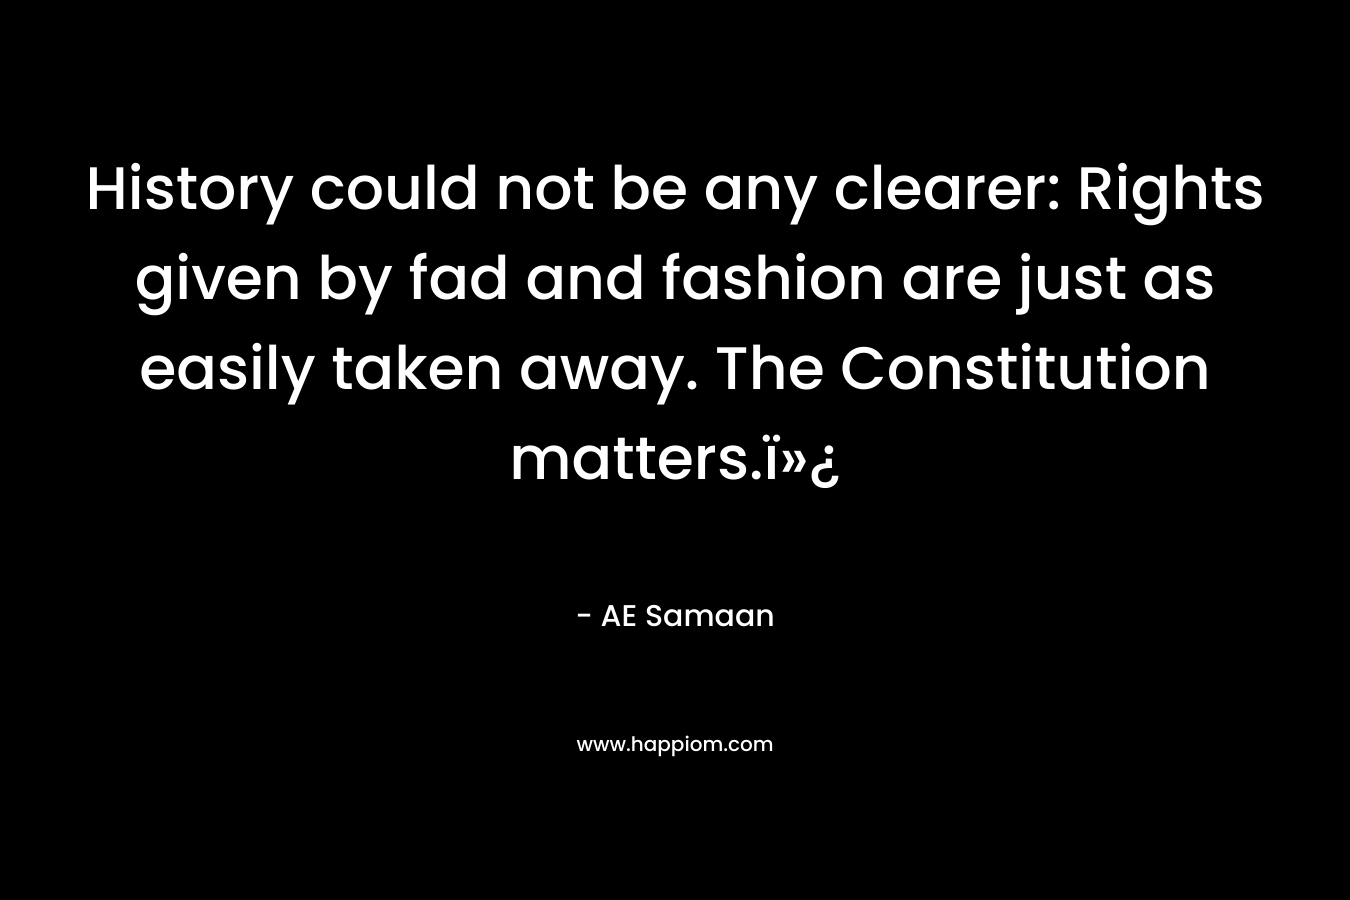 History could not be any clearer: Rights given by fad and fashion are just as easily taken away. The Constitution matters.ï»¿